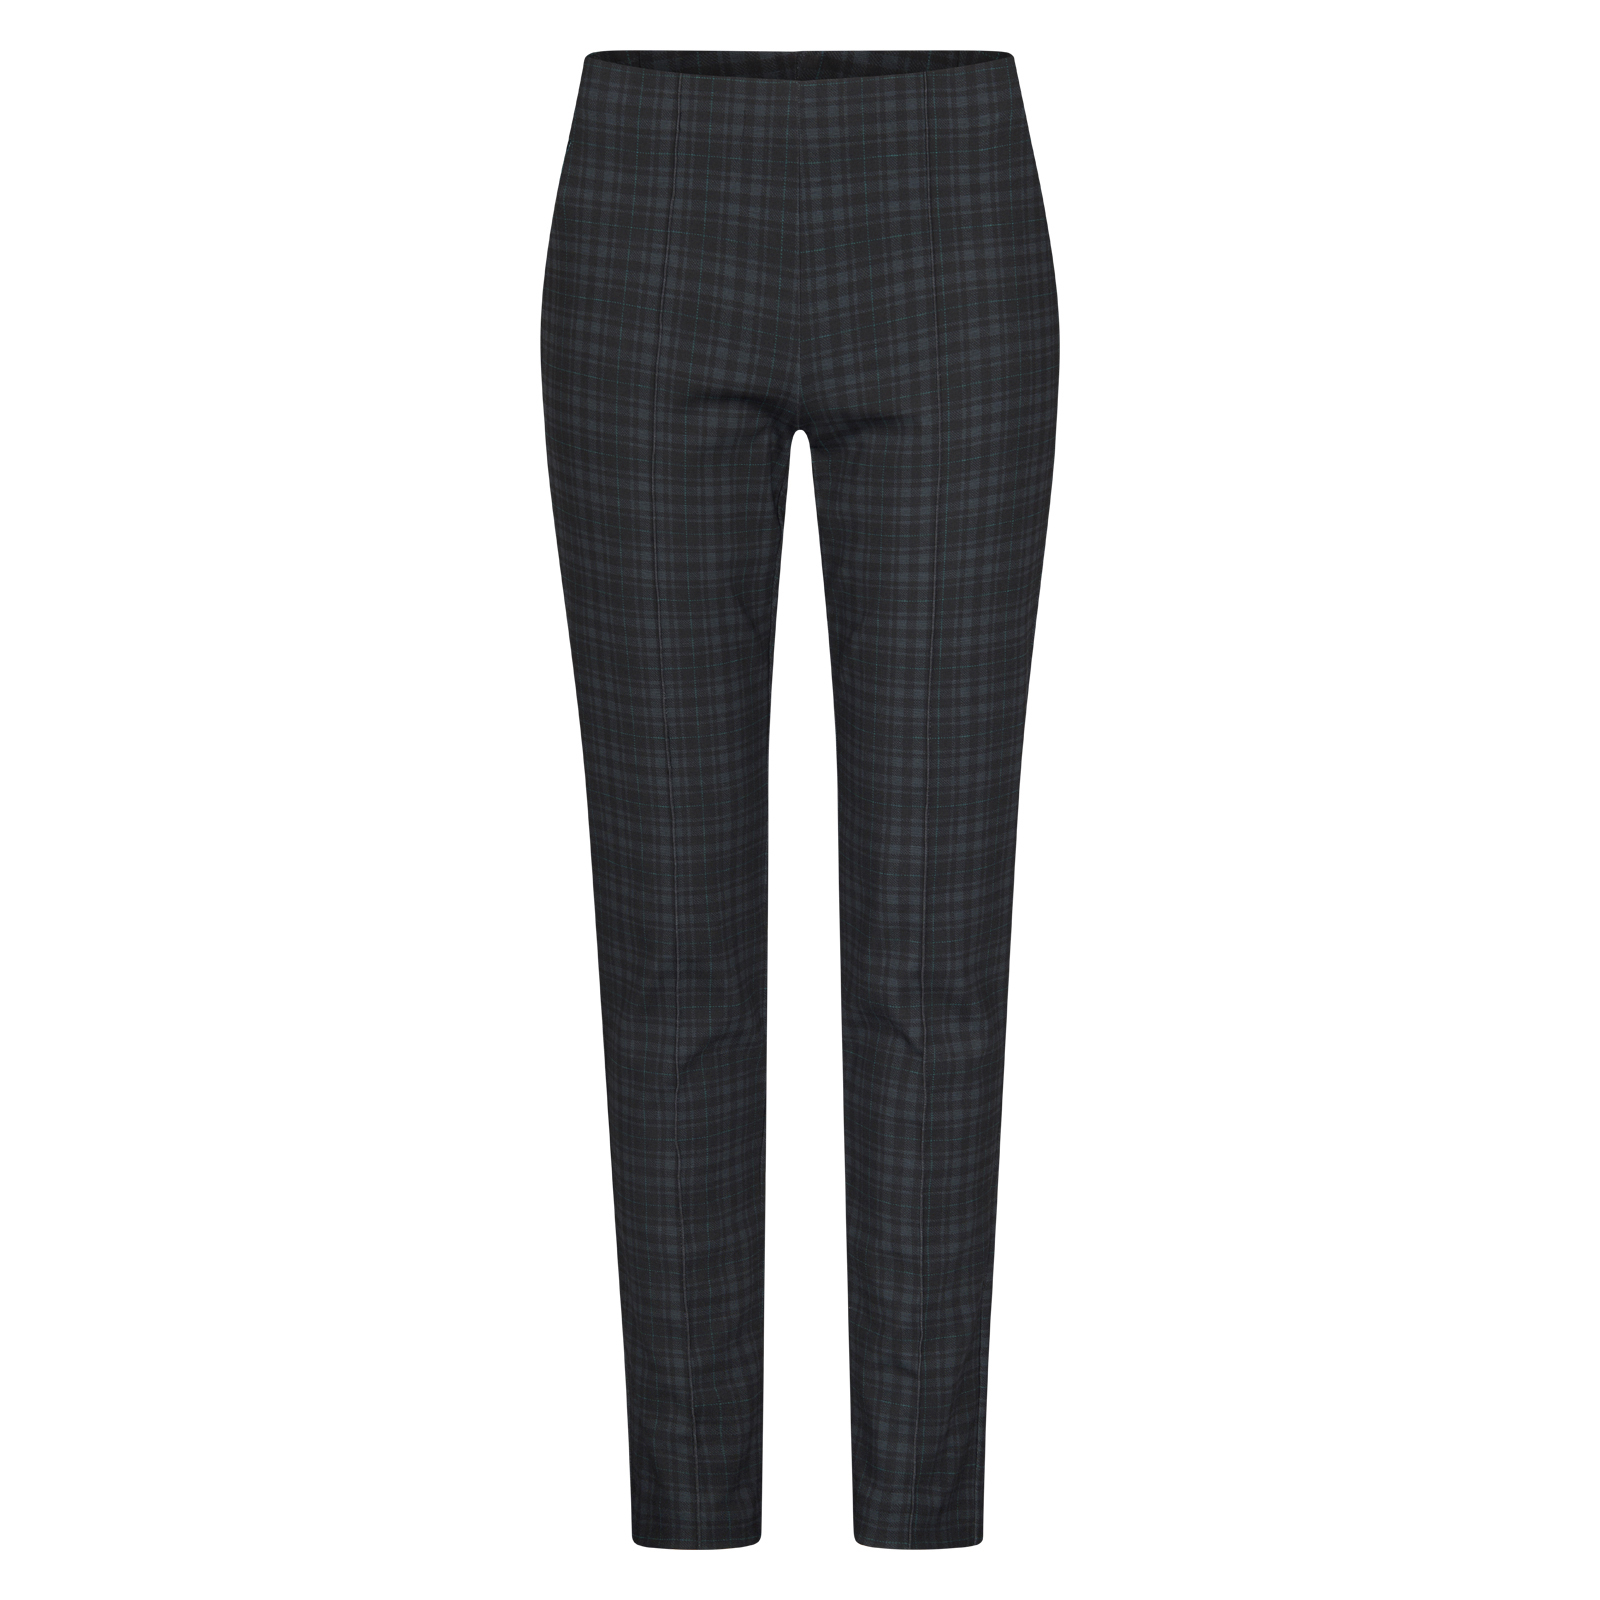 Ladies' slim fit stretch golf trousers in an attractive check pattern with rayon